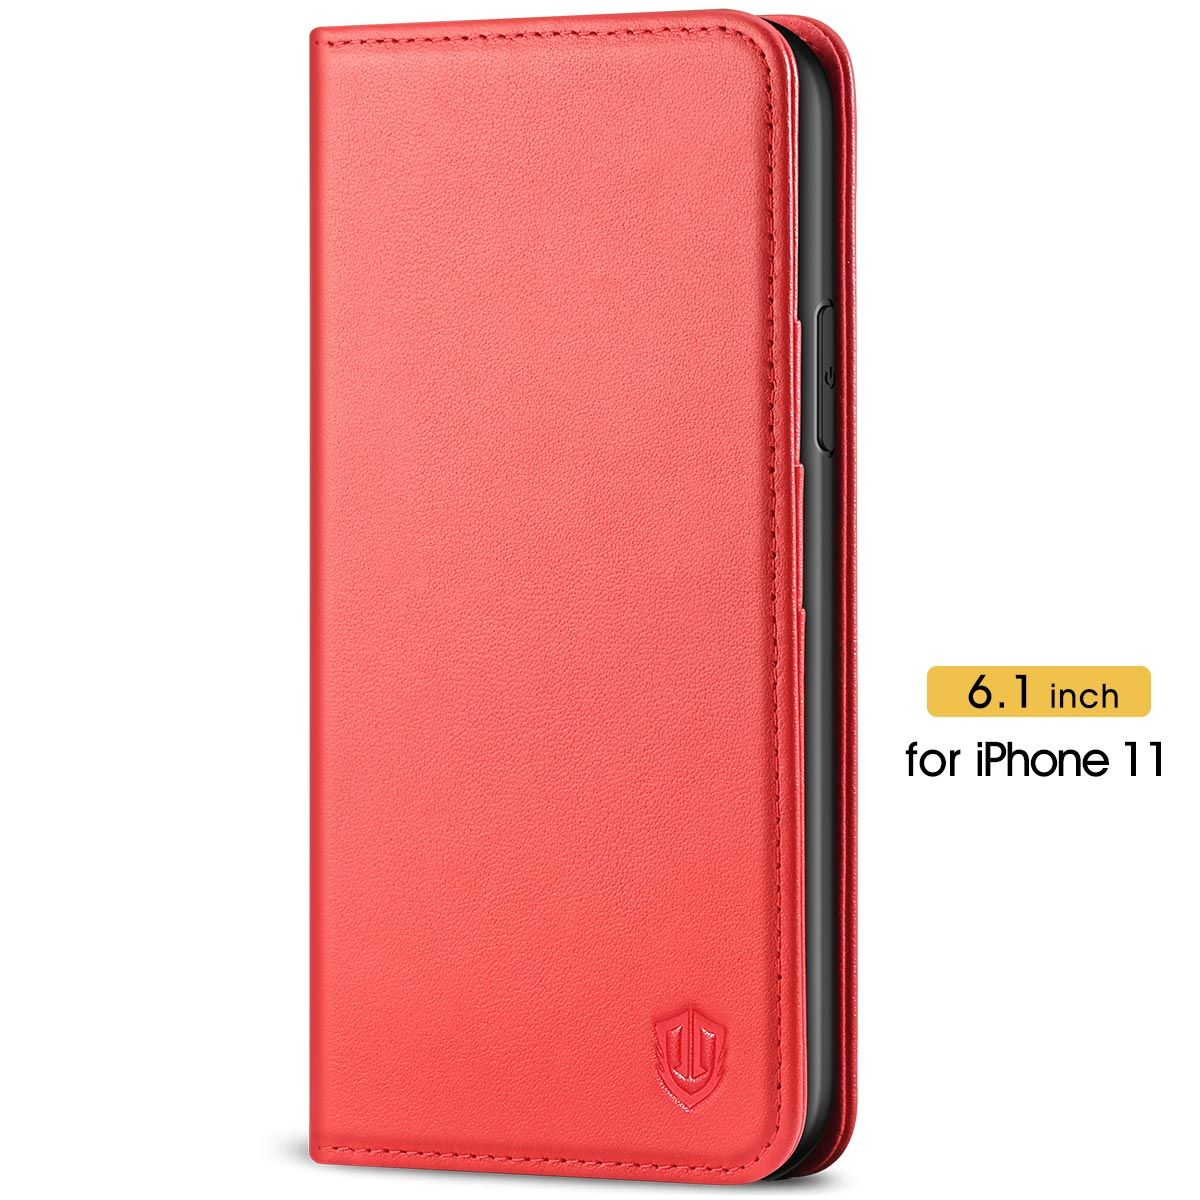 Shieldon Iphone 11 Wallet Case Iphone 11 Leather Cover Genuine Leather Rfid Blocking Flip Folio Kickstand Magnetic Closure